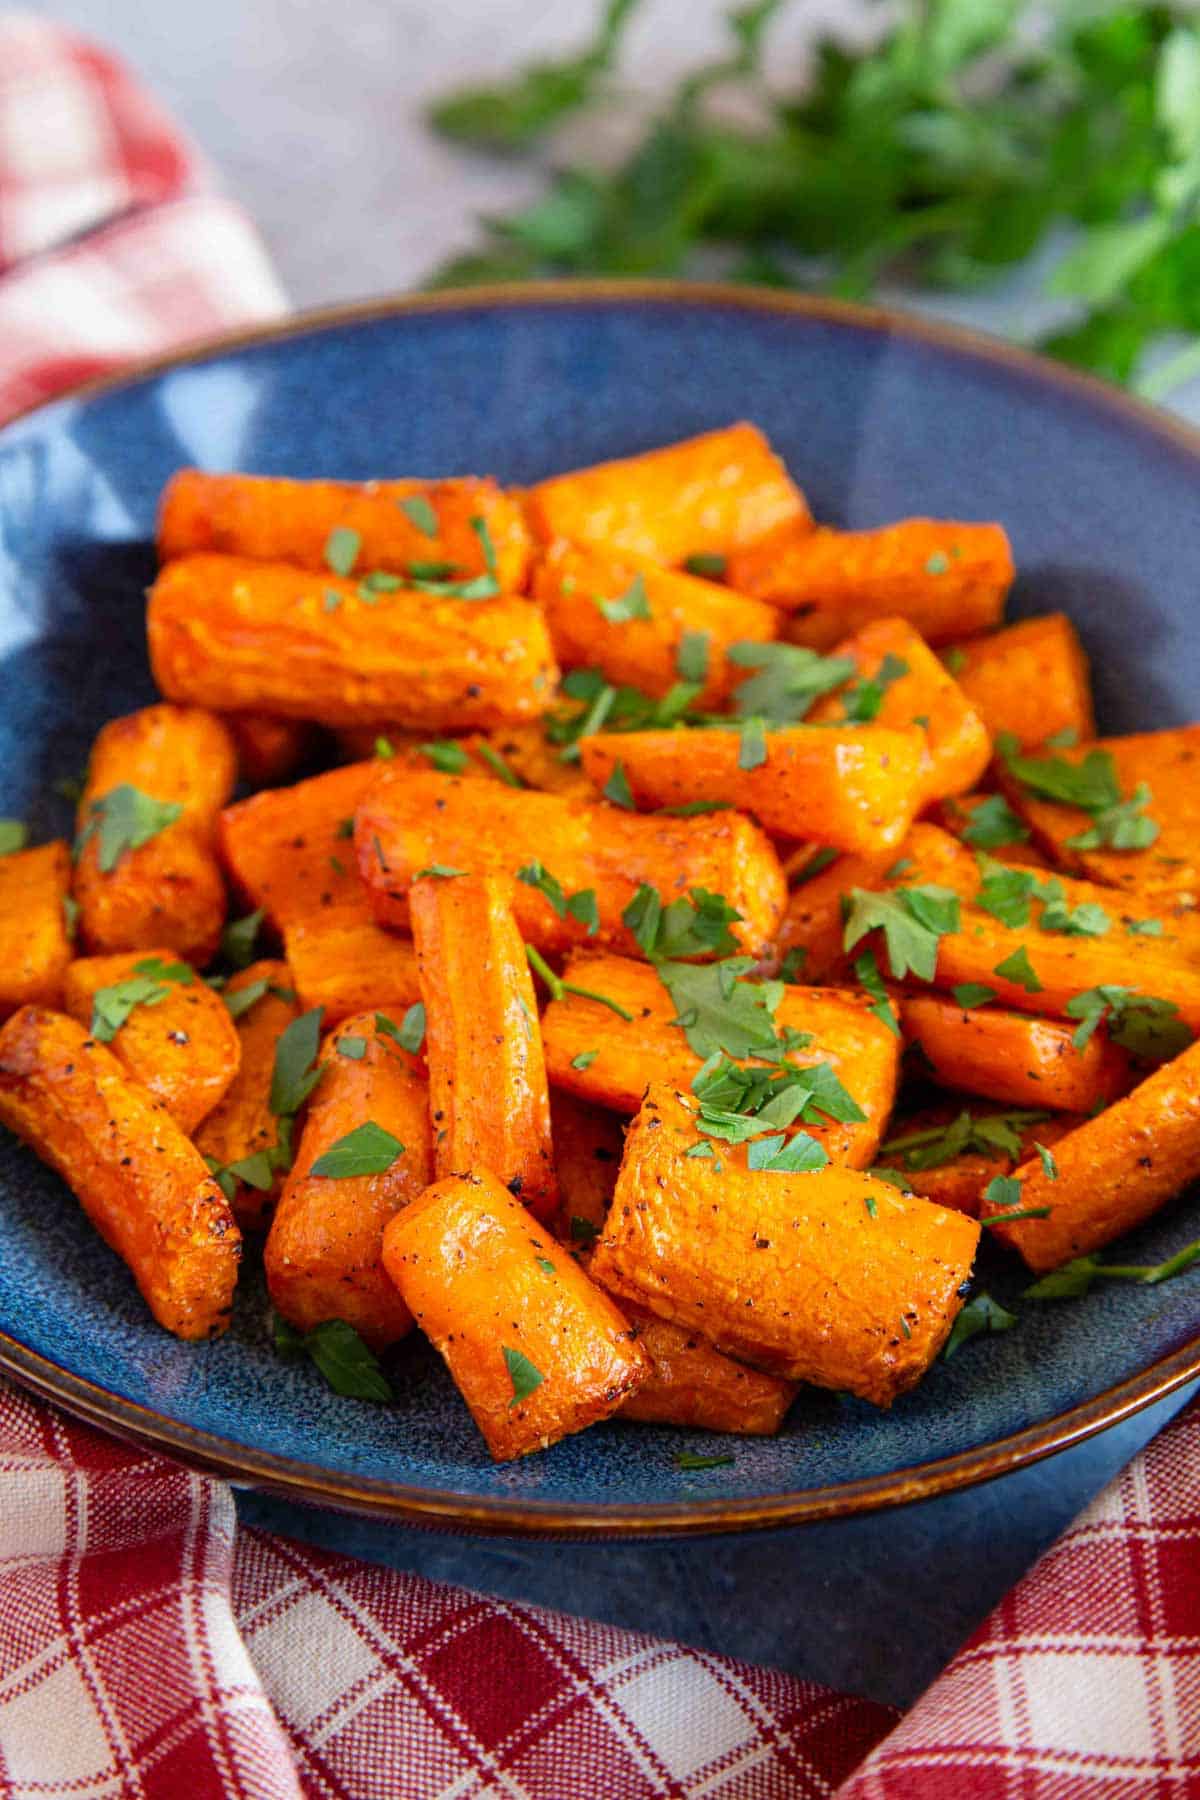 Air fryer carrots garnished with chopped parsley in a blue serving bowl.